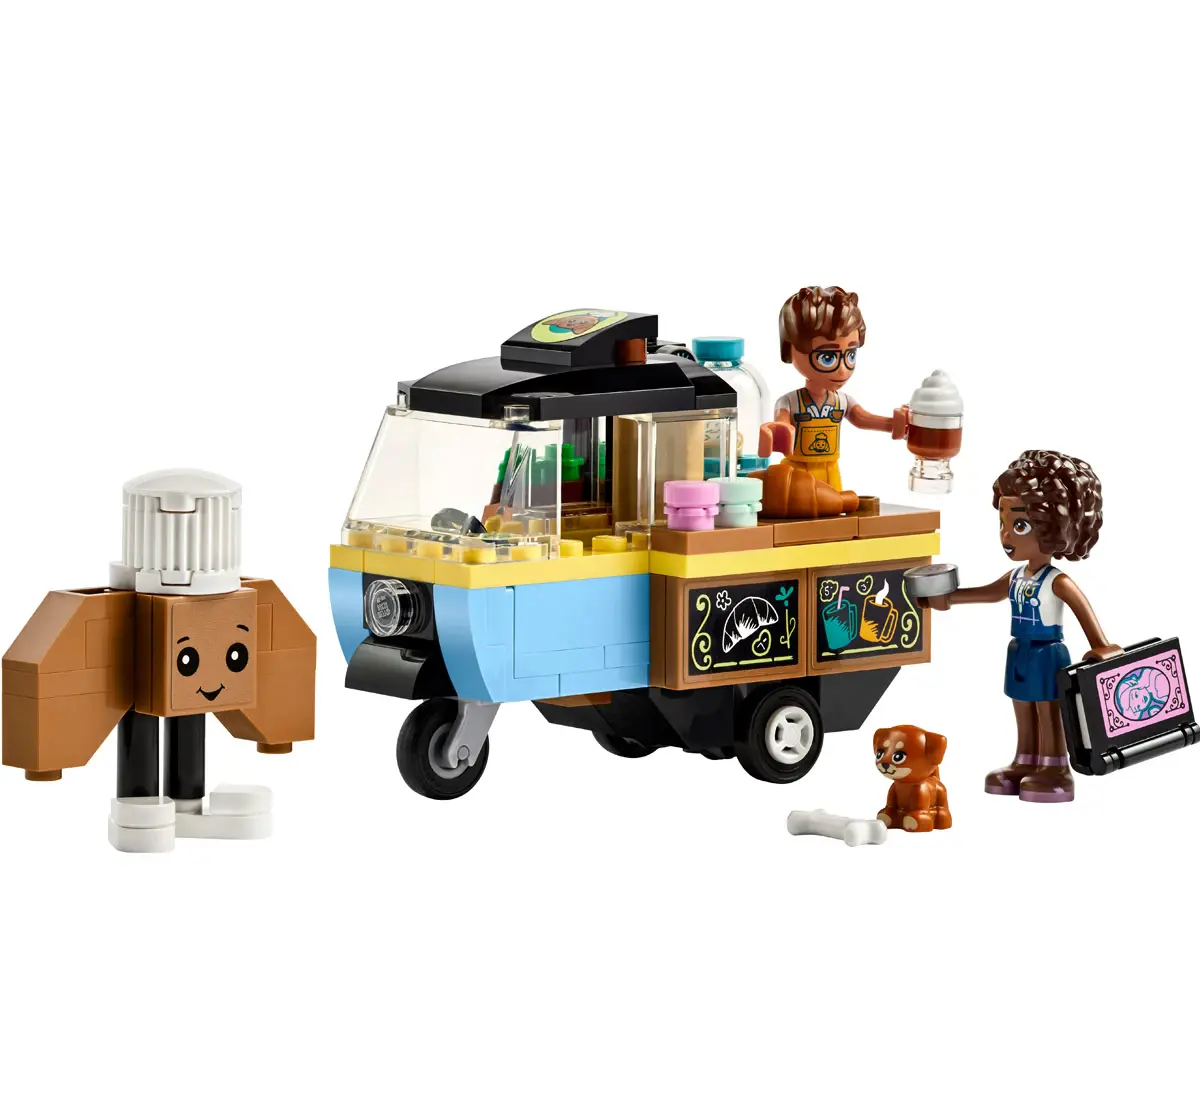 Lego Friends Mobile Bakery Food Cart Toy 42606 Multicolour For Kids Ages 6Y+ (125 Pieces) 